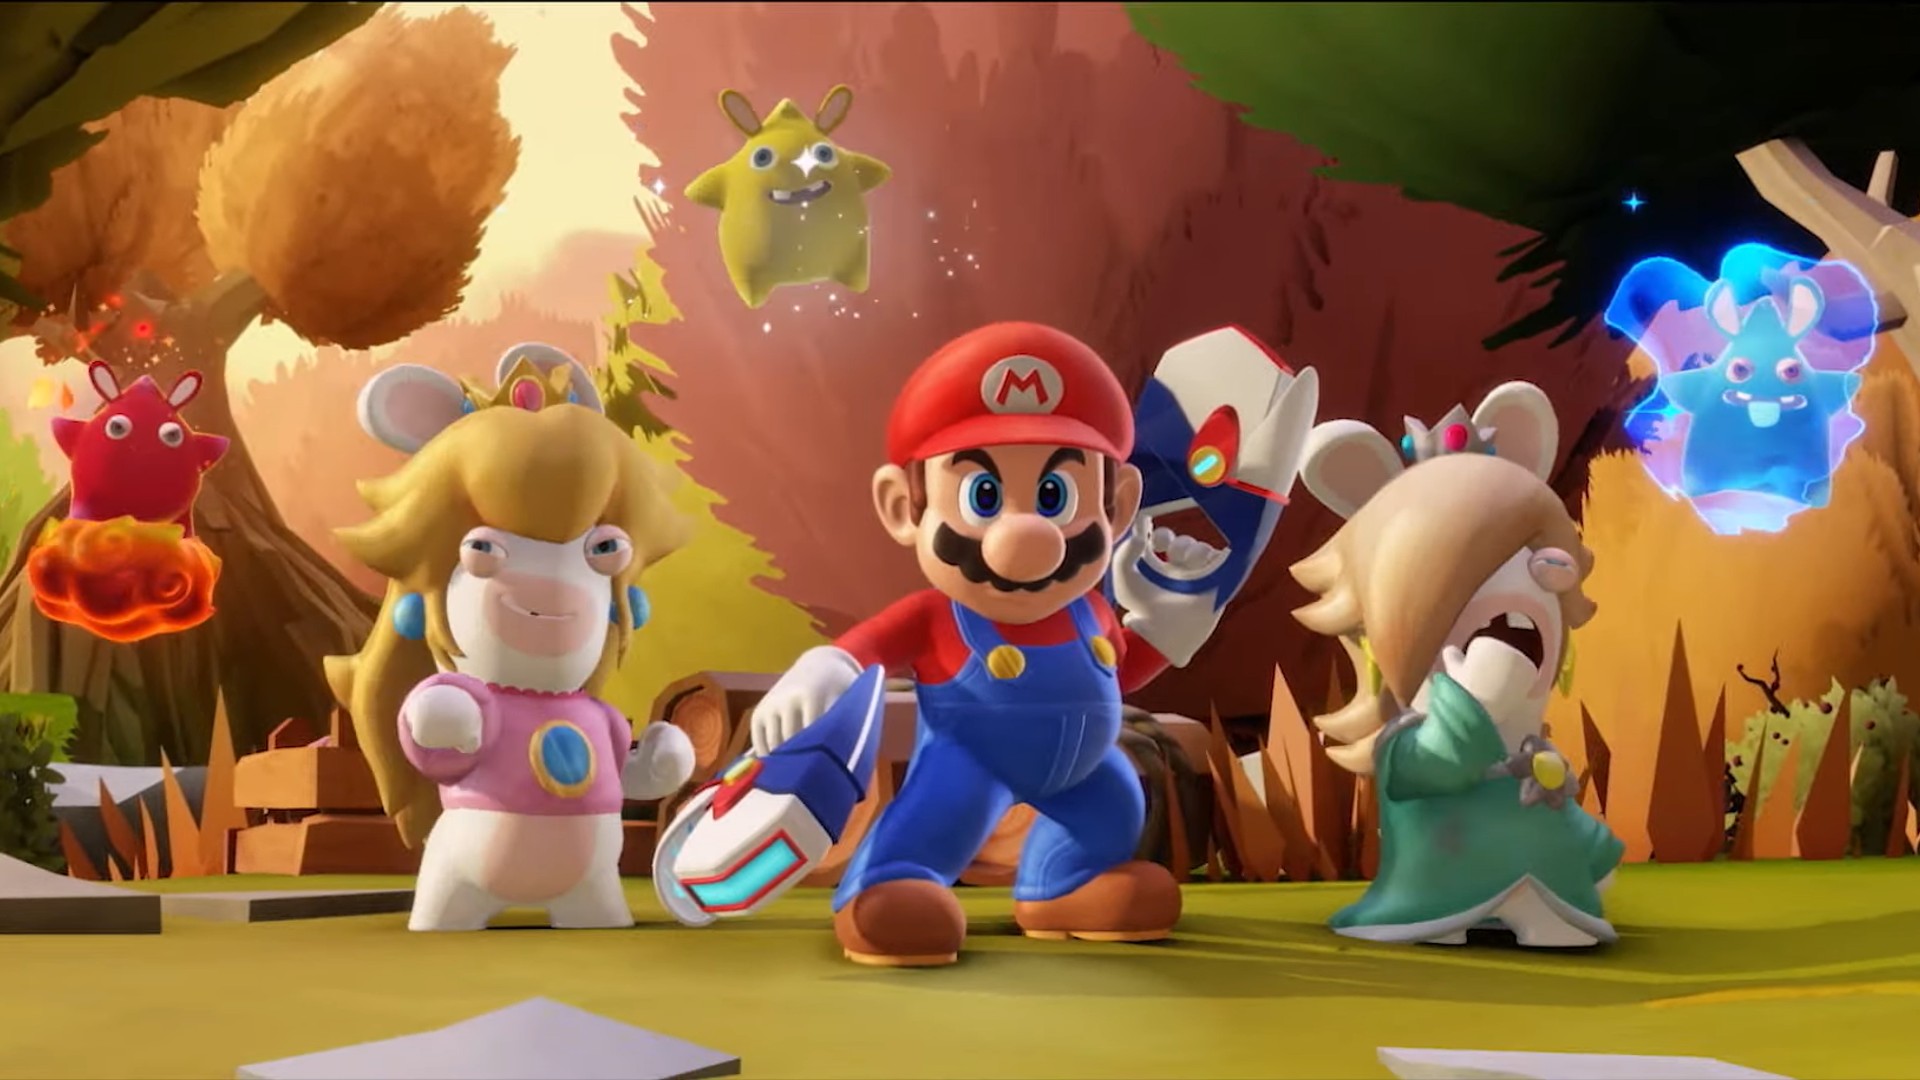 Mario + Rabbids: Sparks of Hope we know so far